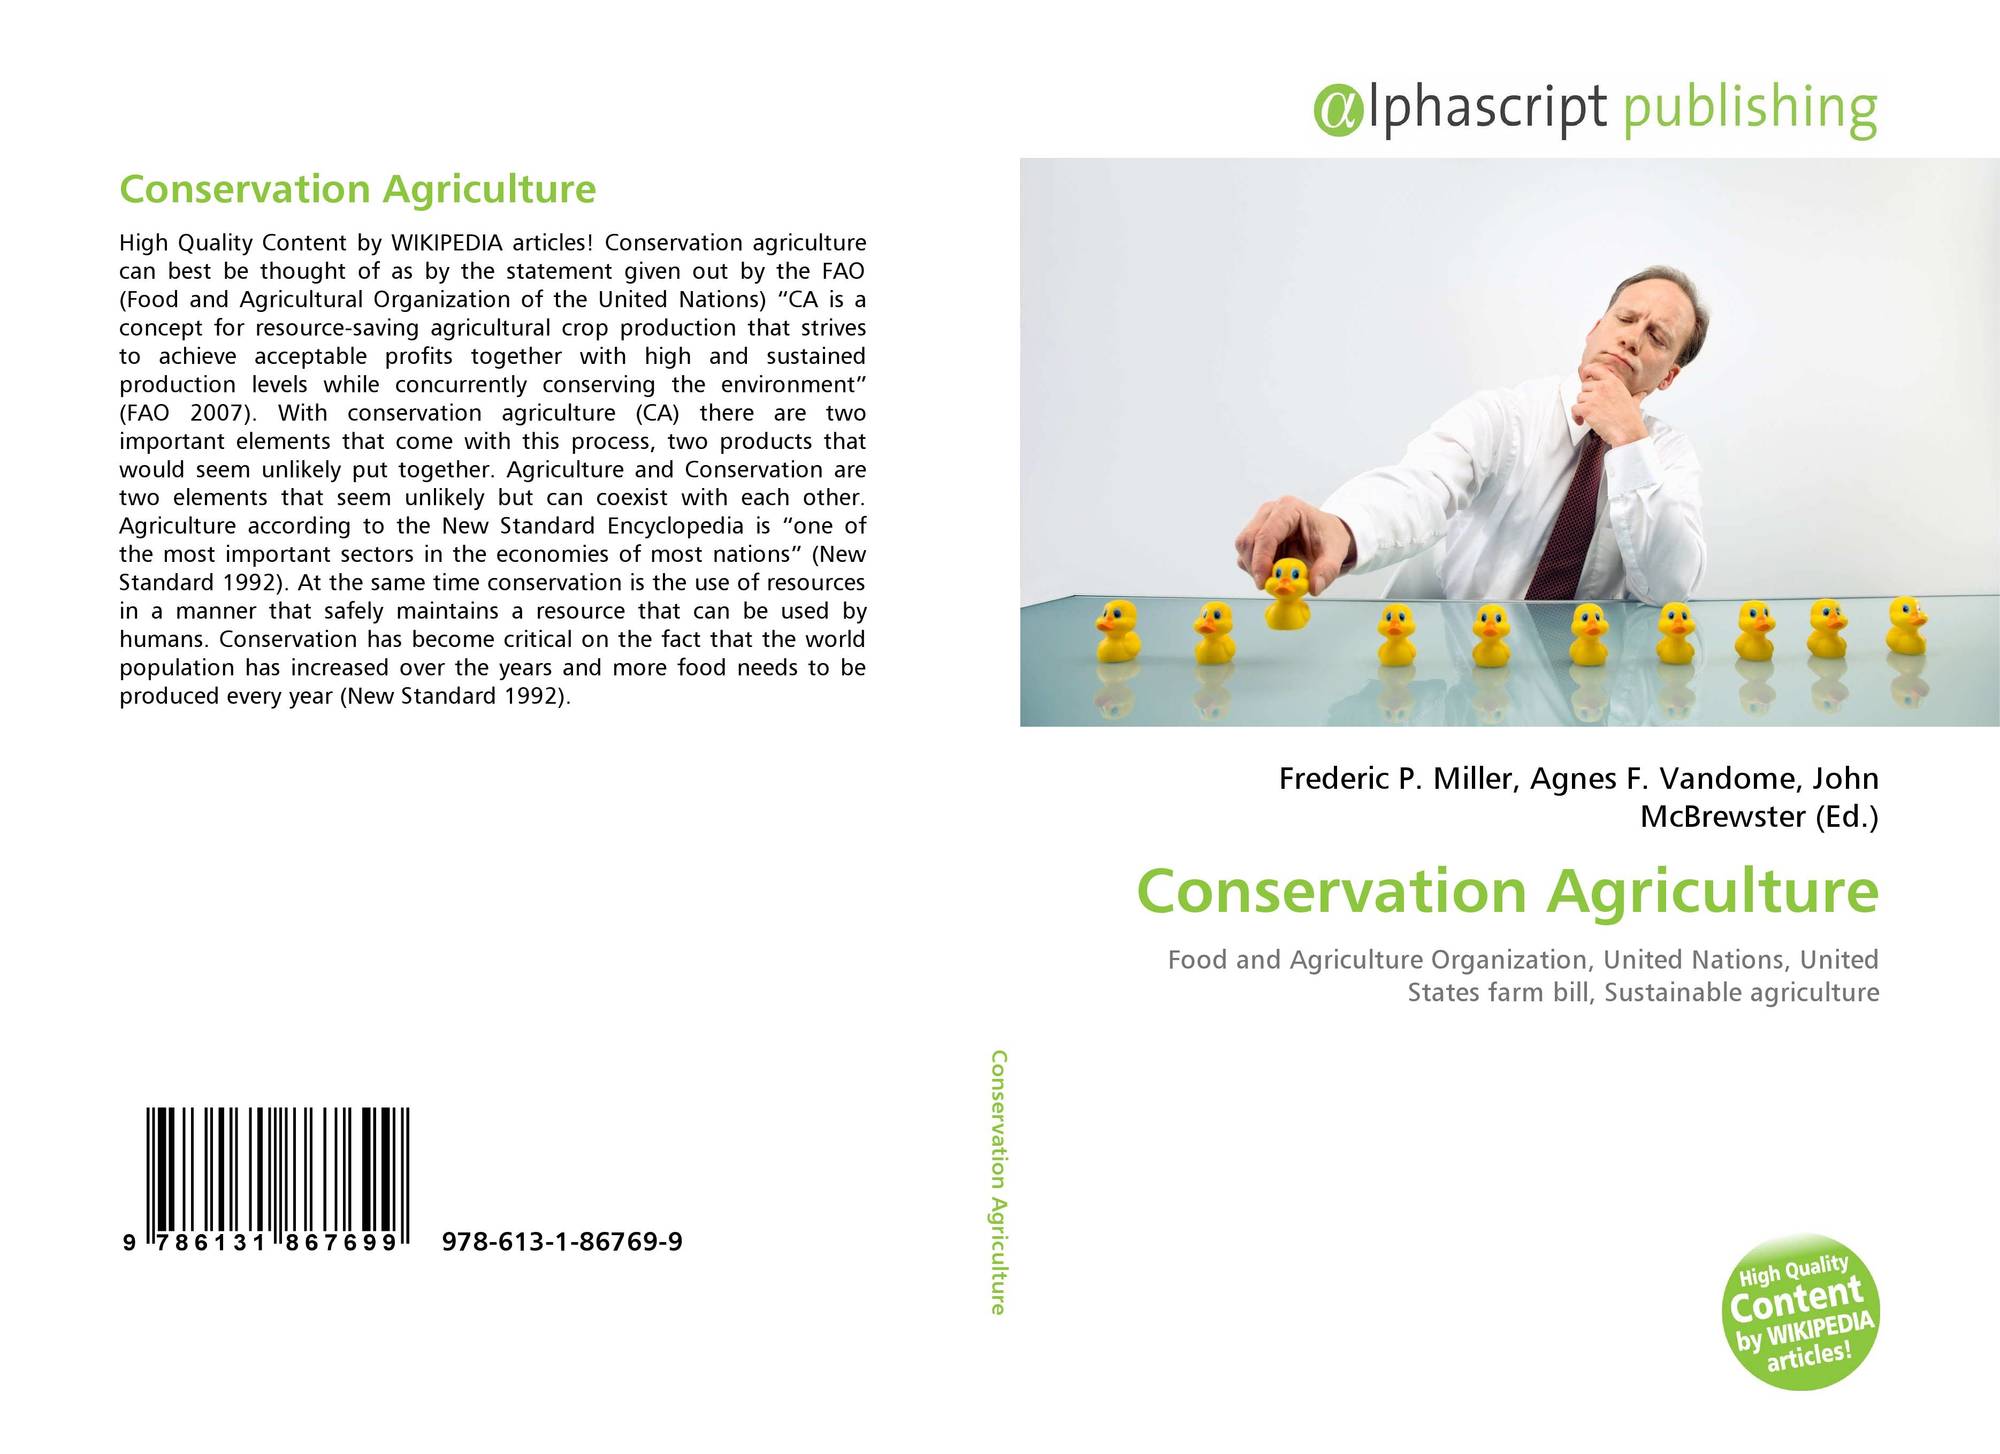 research studies on conservation agriculture